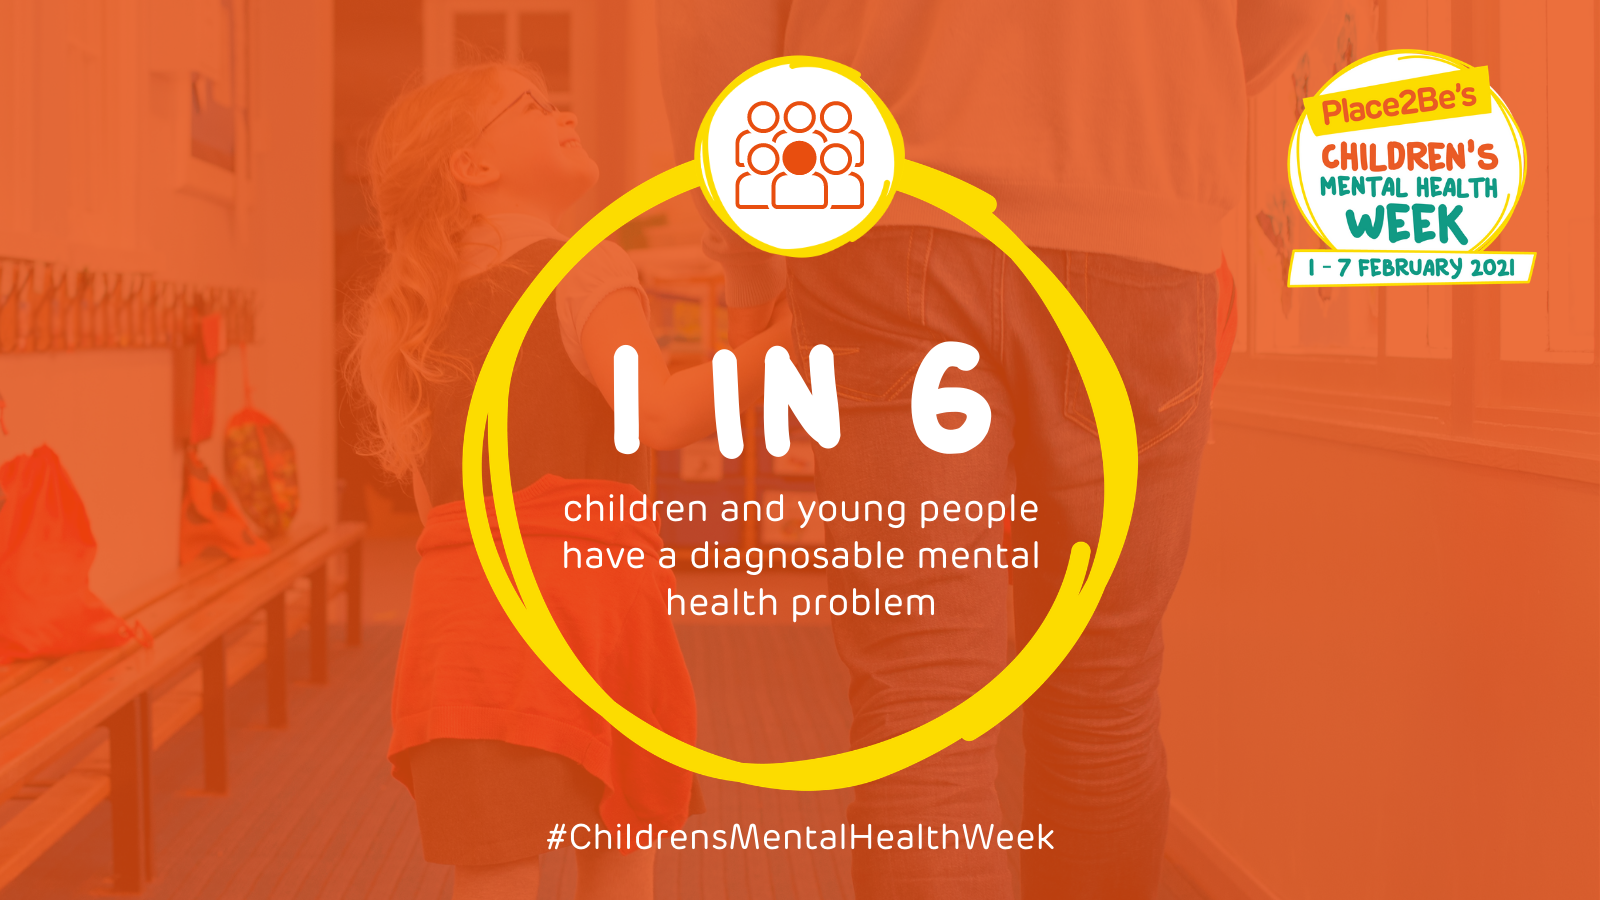 1 in 6 children and young people have a diagnosable mental health problem